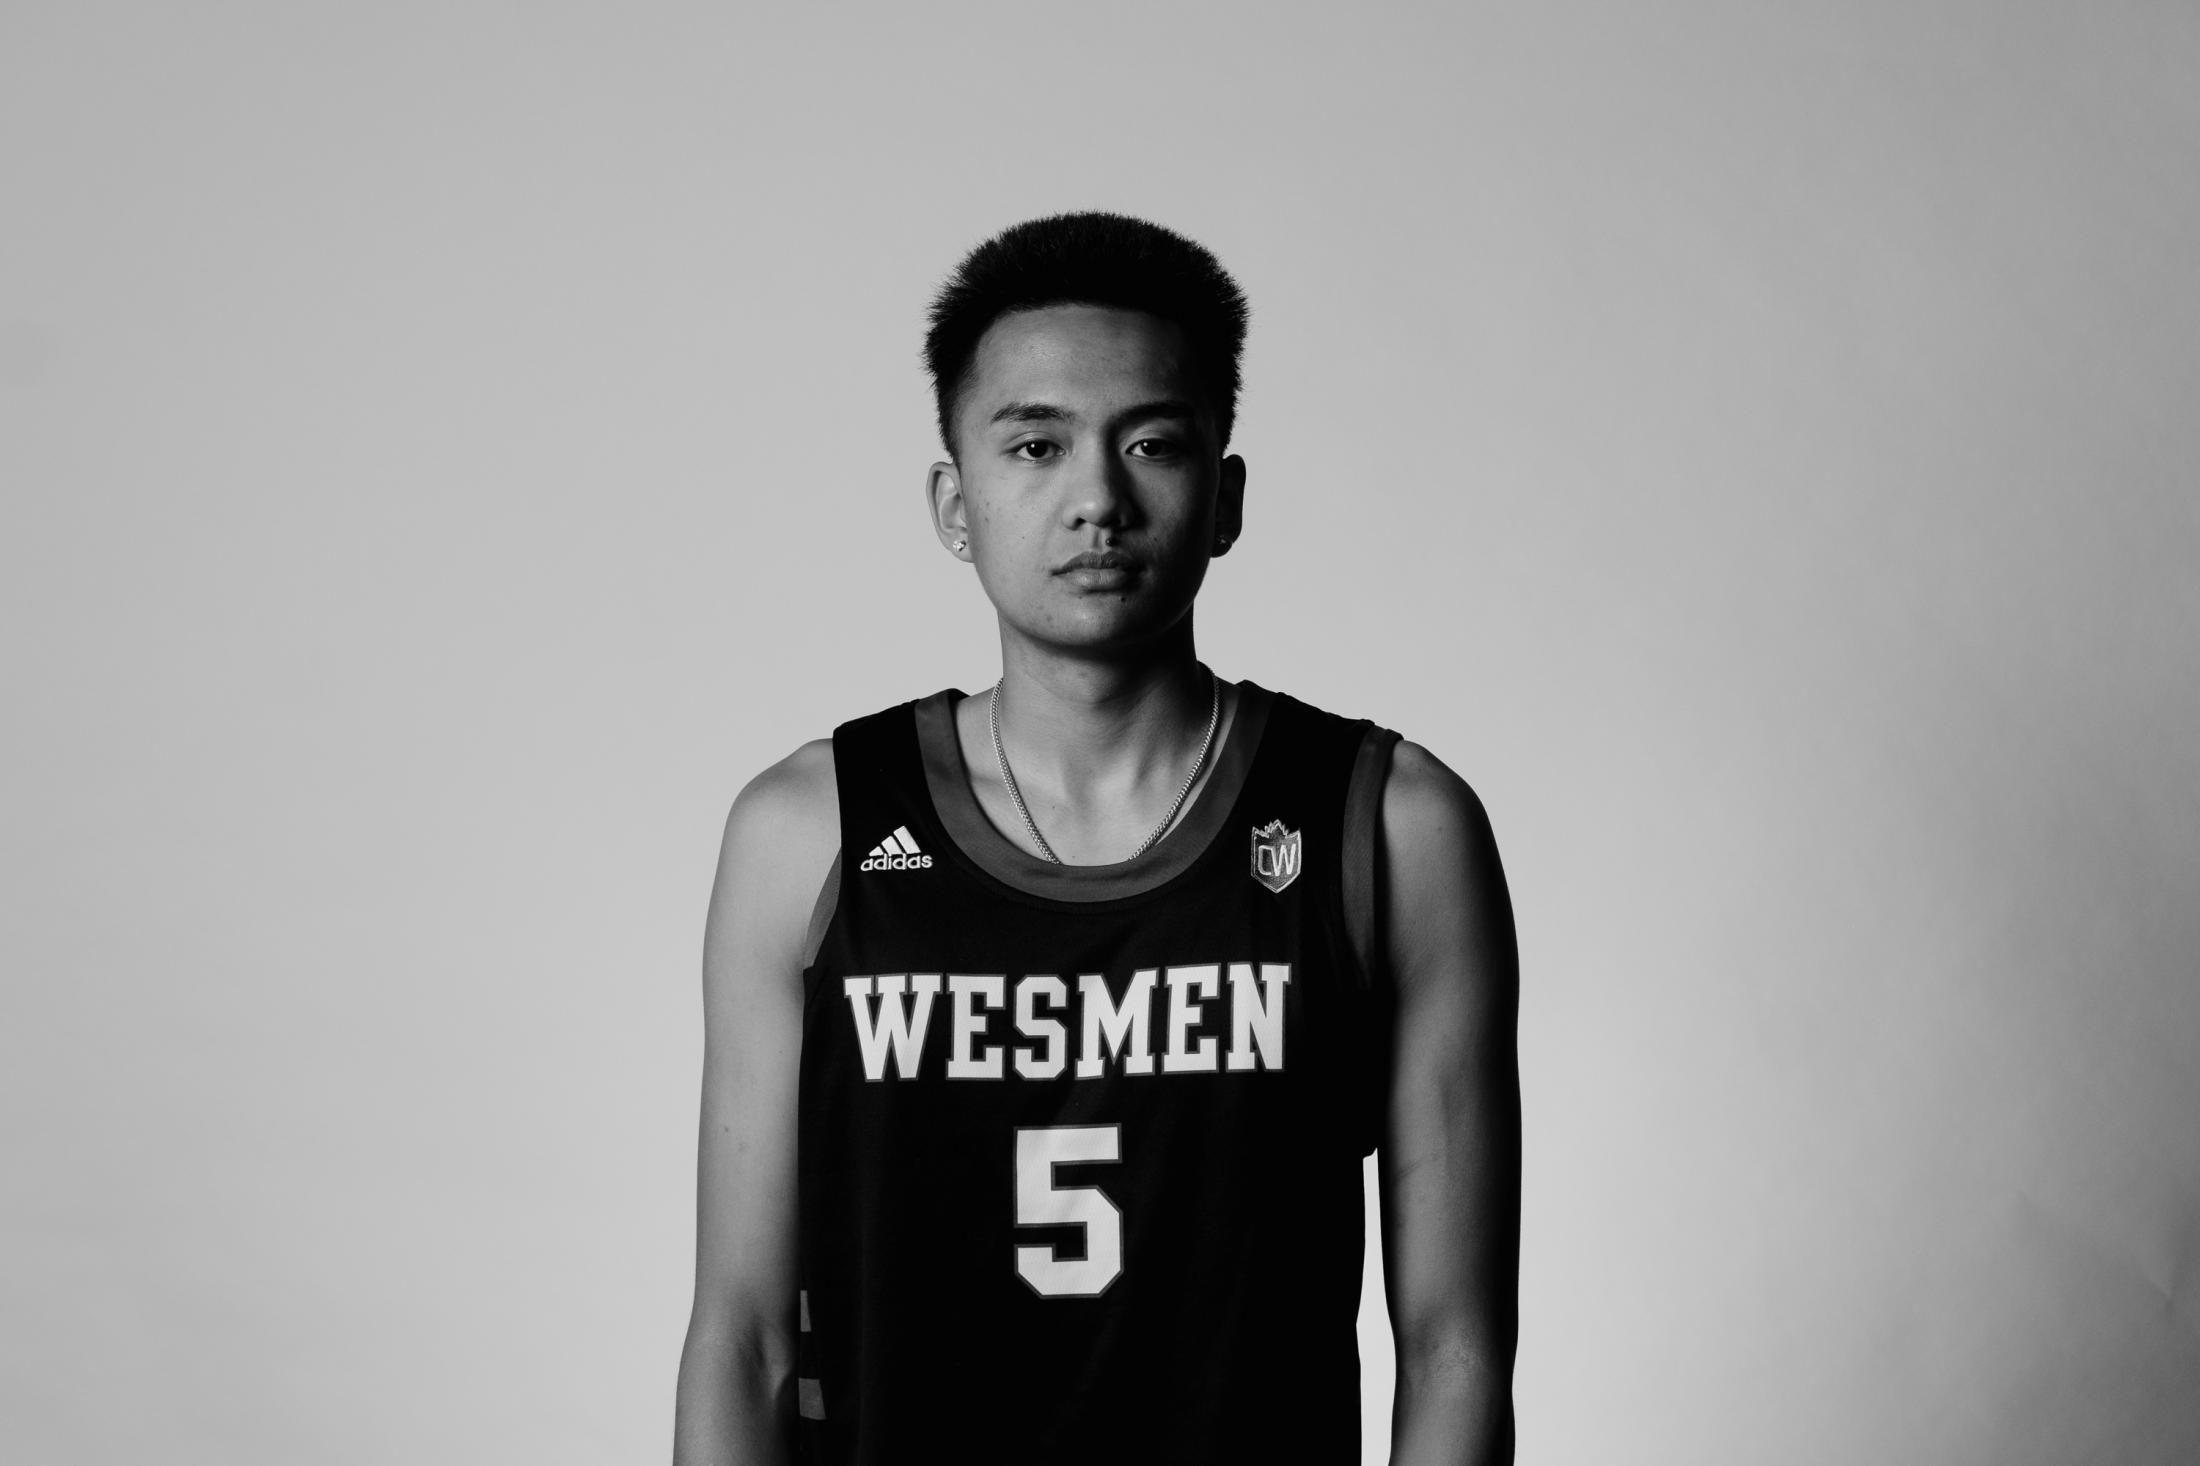 Daniel Crump / Wesmen Athletics. Headshots and candids. Sports are back baby! September 7, 2021.